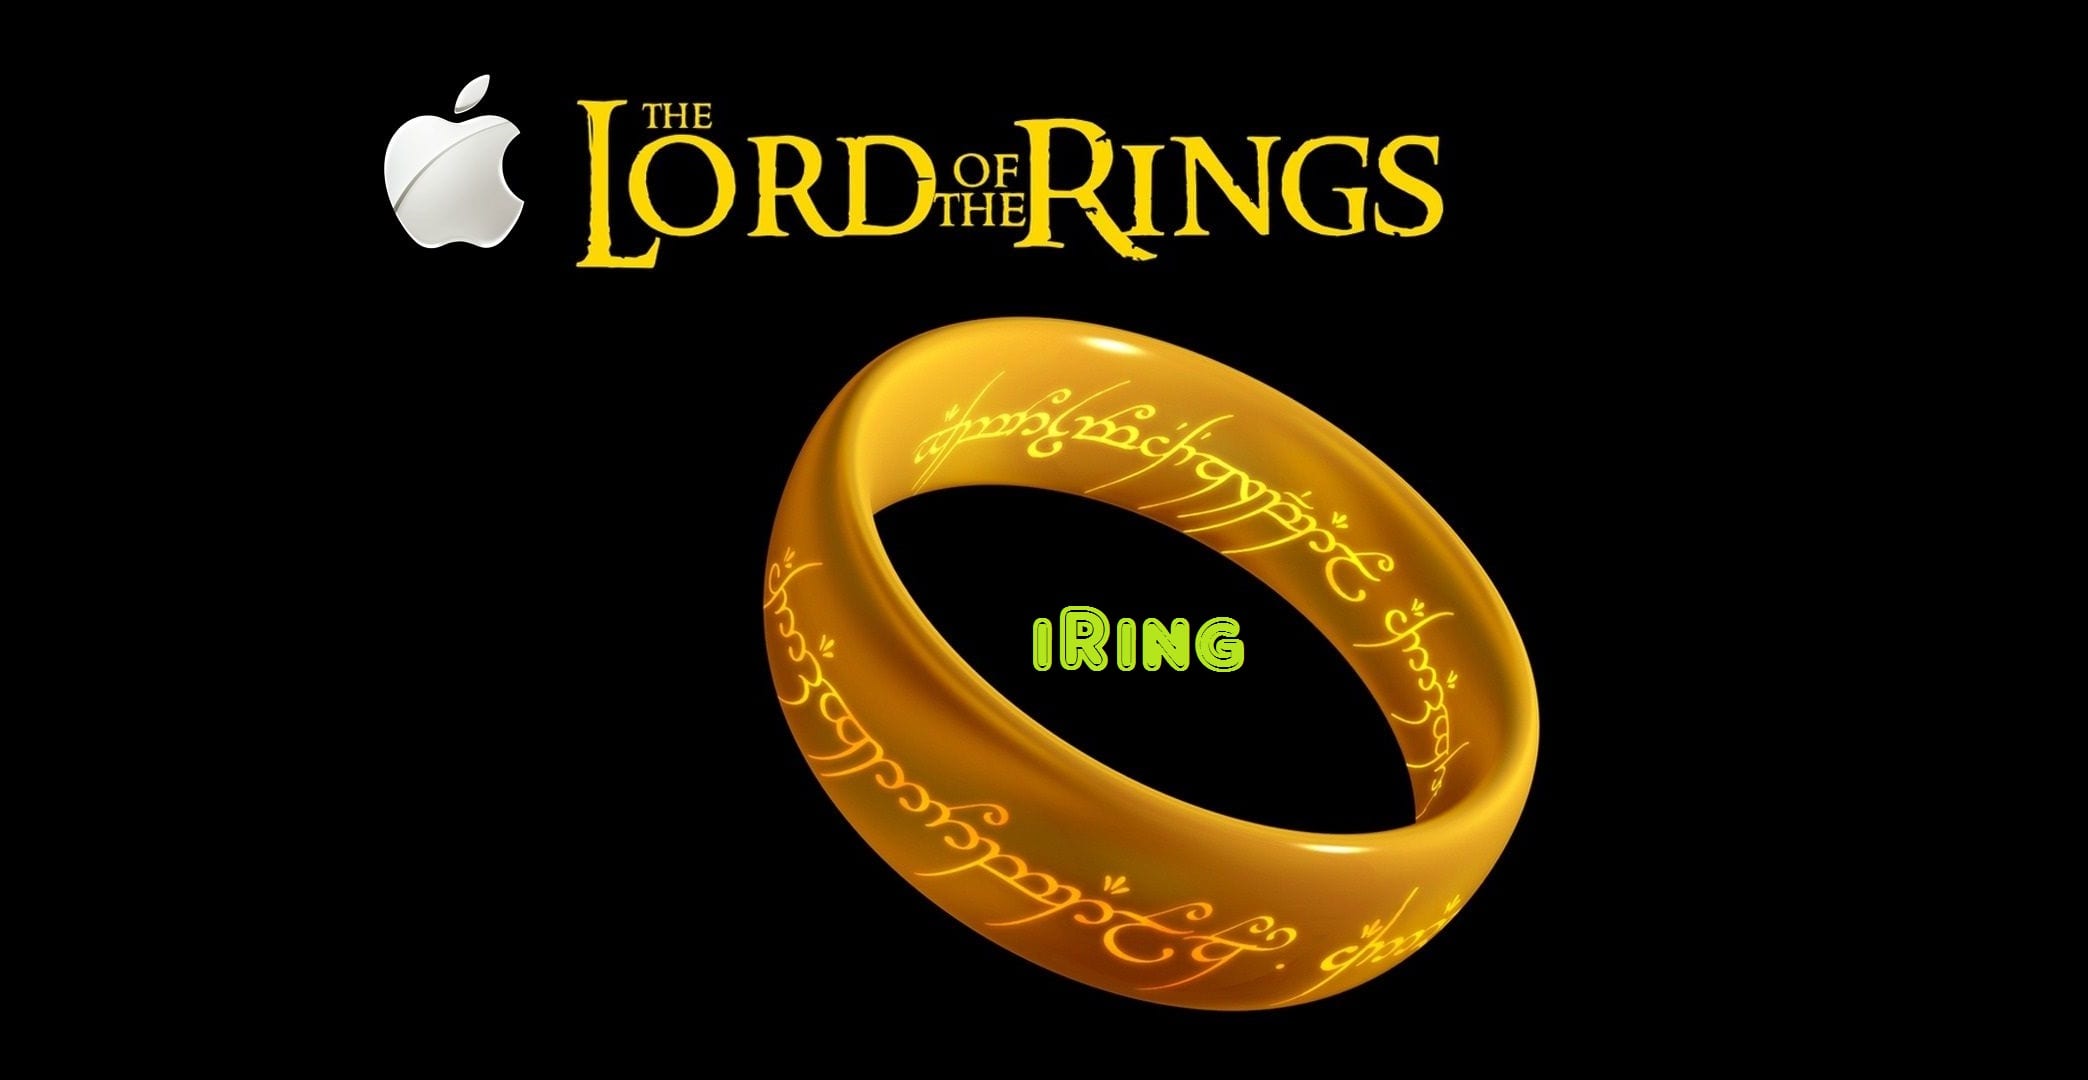 download the new version for apple The Lord of the Rings: The Return of